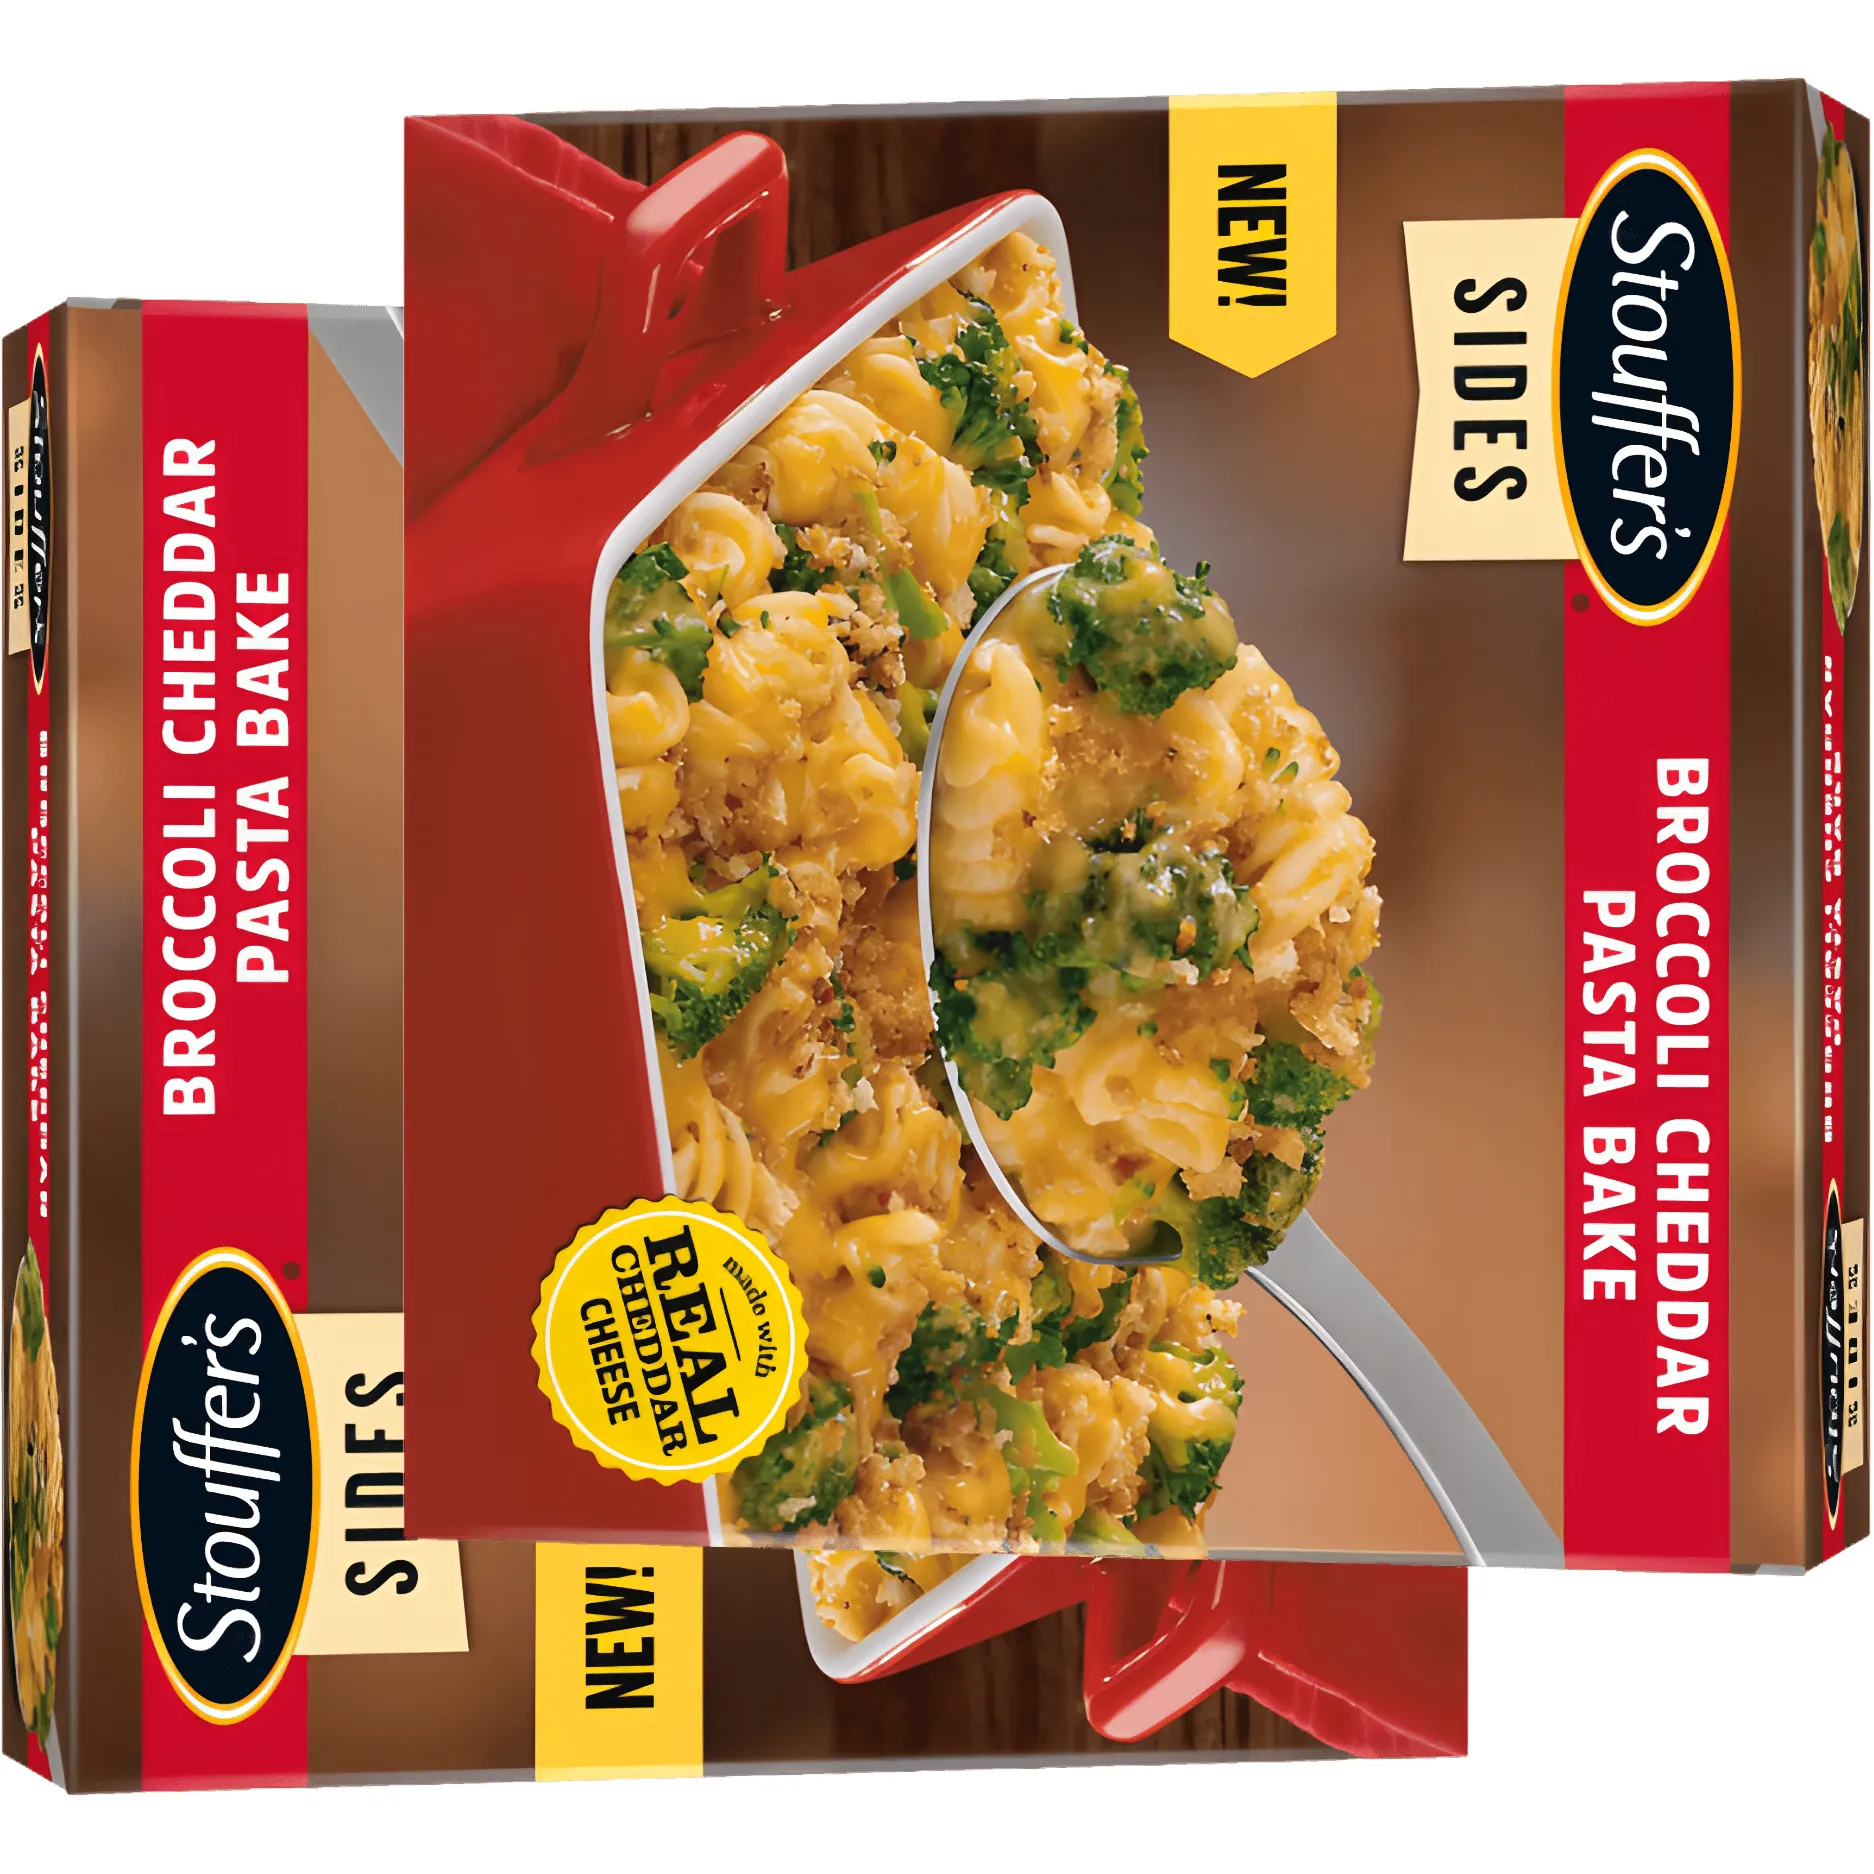 Free Stouffer’s Cheddar Broccoli Pasta Bake After Review